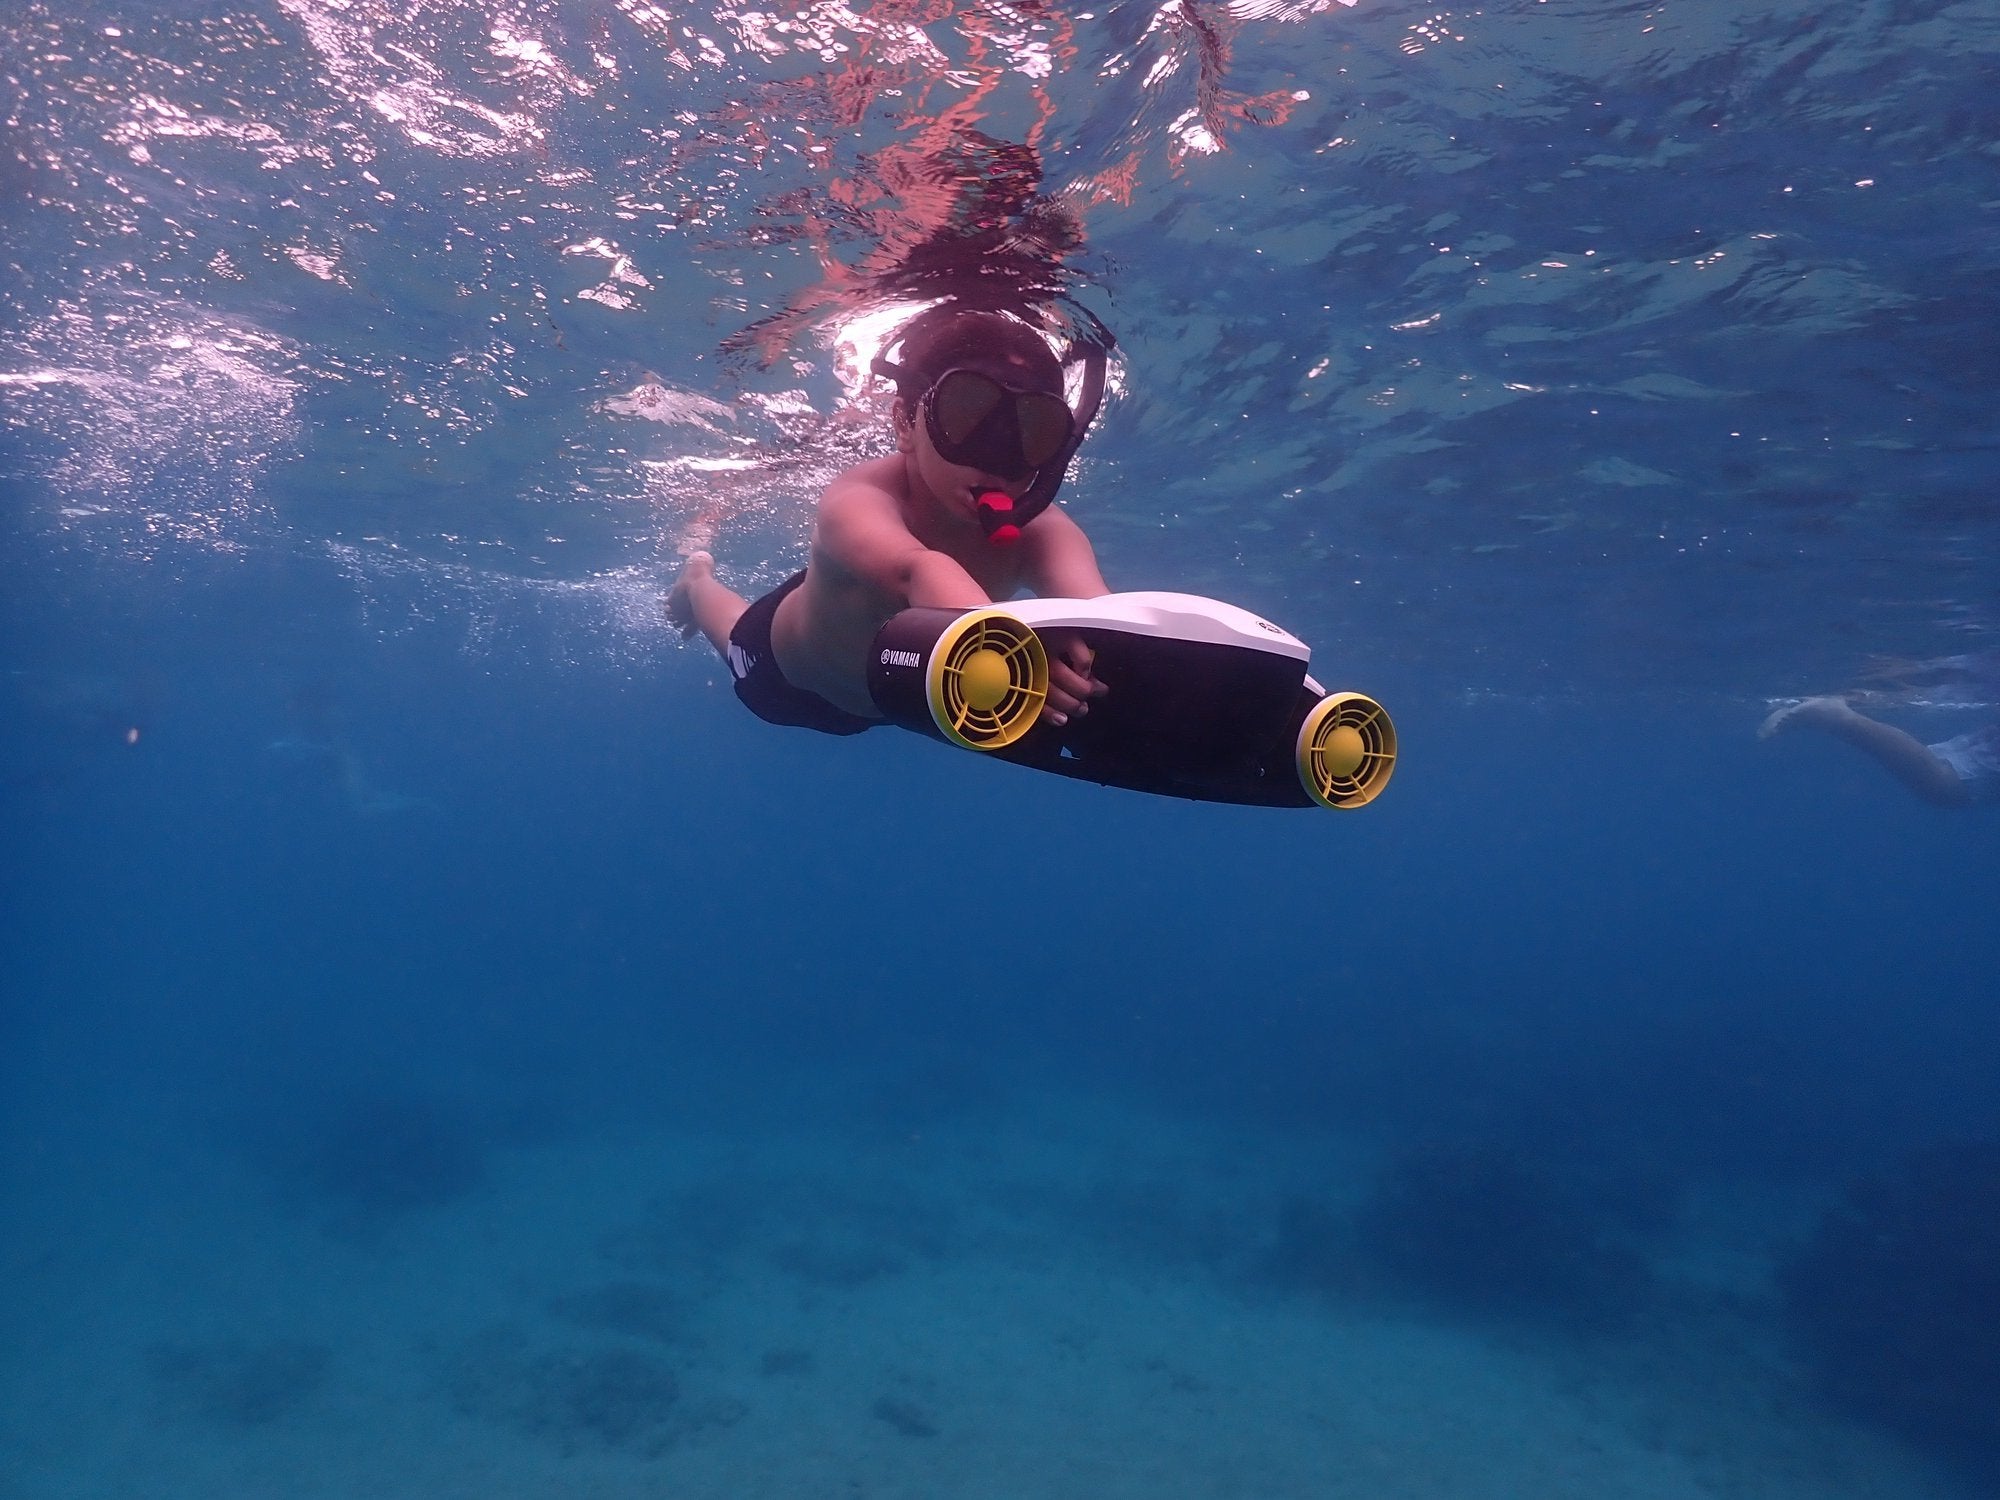 Front view of a young boy using his Yamaha Seawing II sea scooter to help proel his snorkeling adventures in these mostly clear waters.